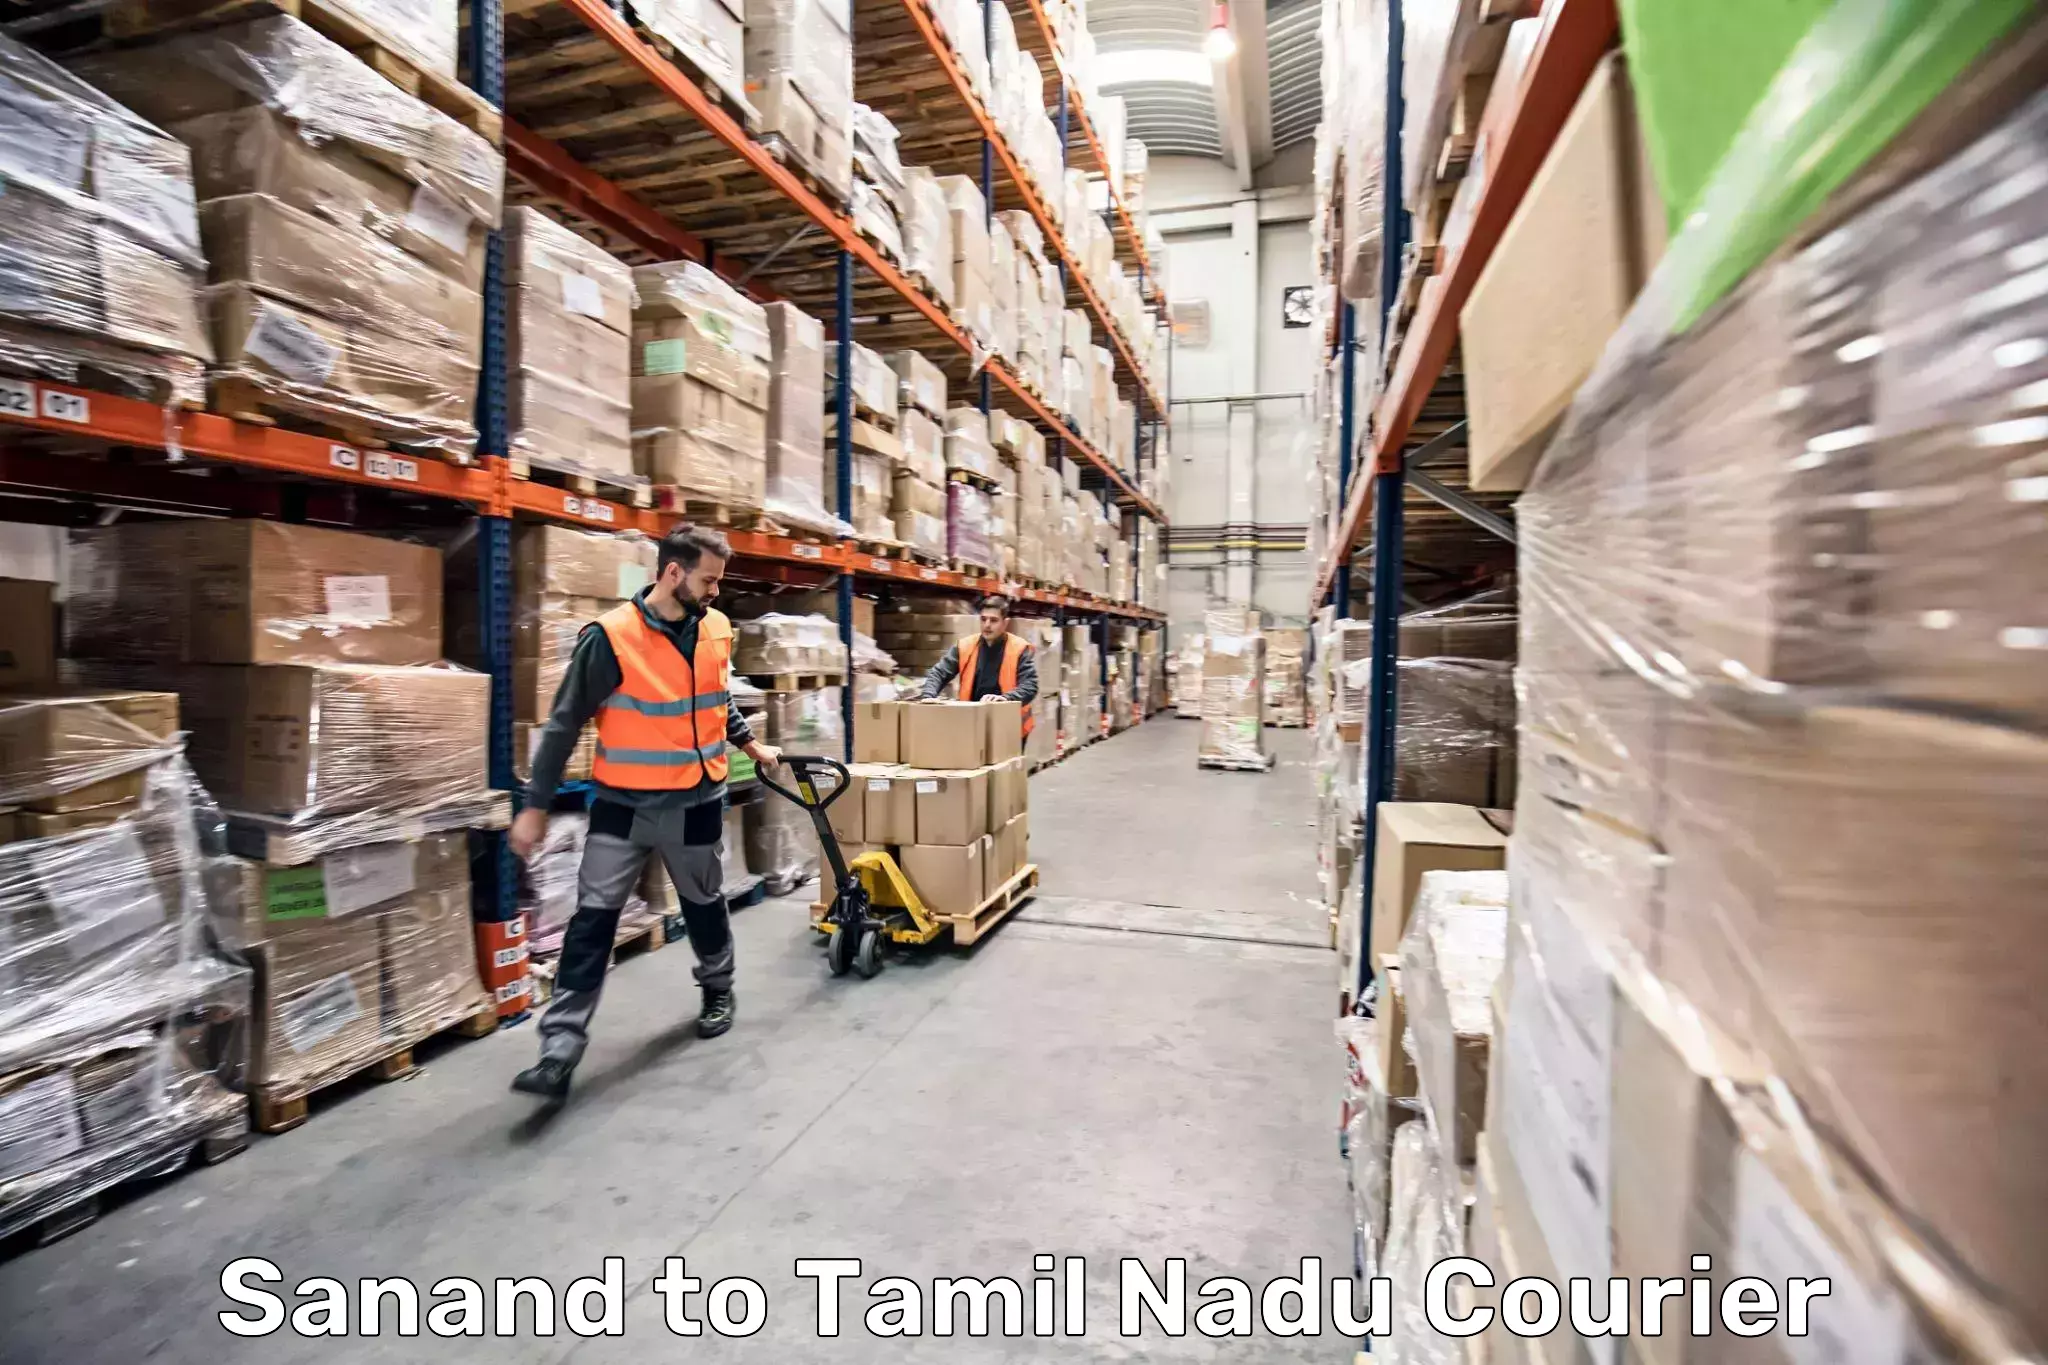 Hassle-free luggage shipping in Sanand to Chennai Port